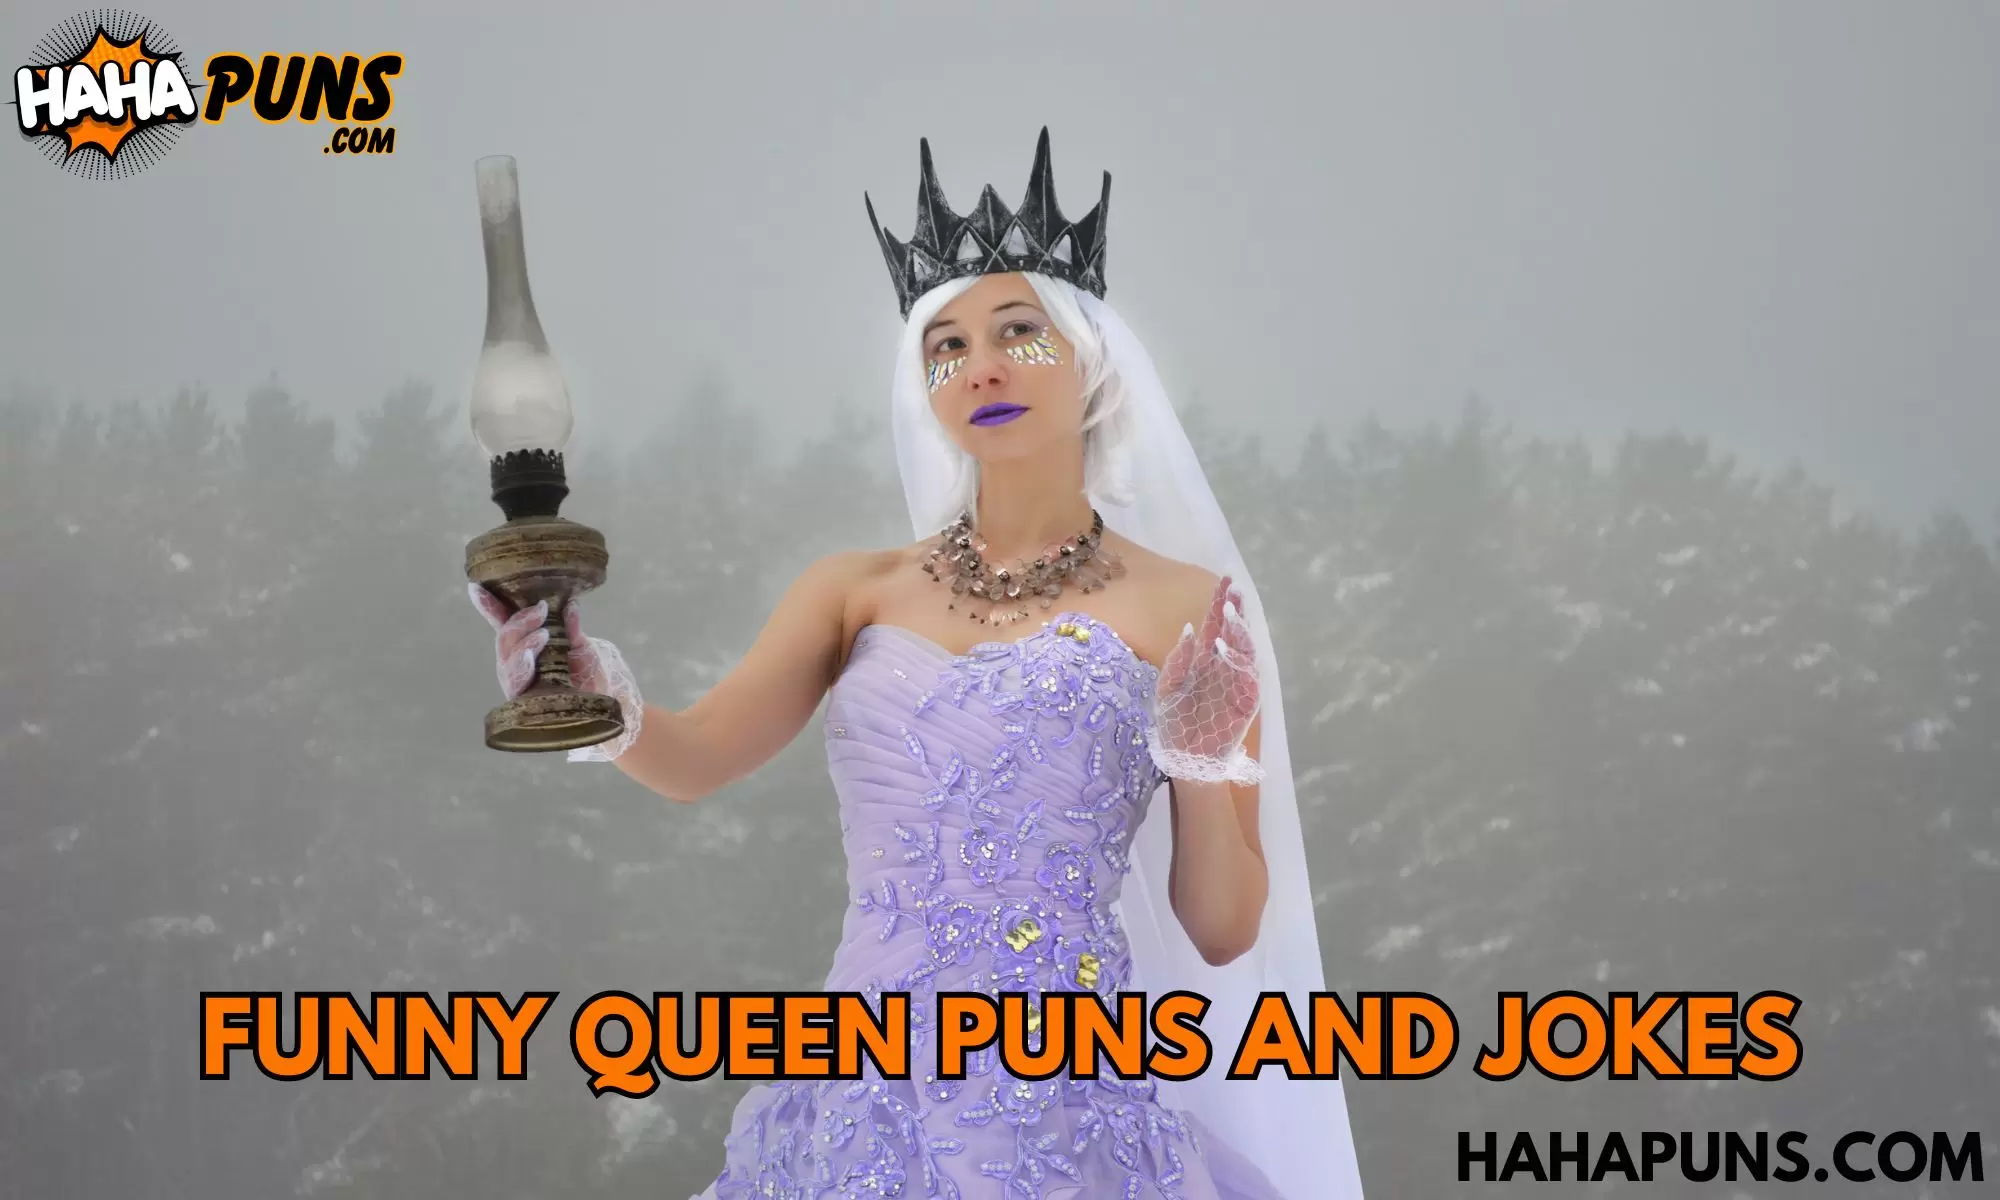 Funny Queen Puns and Jokes